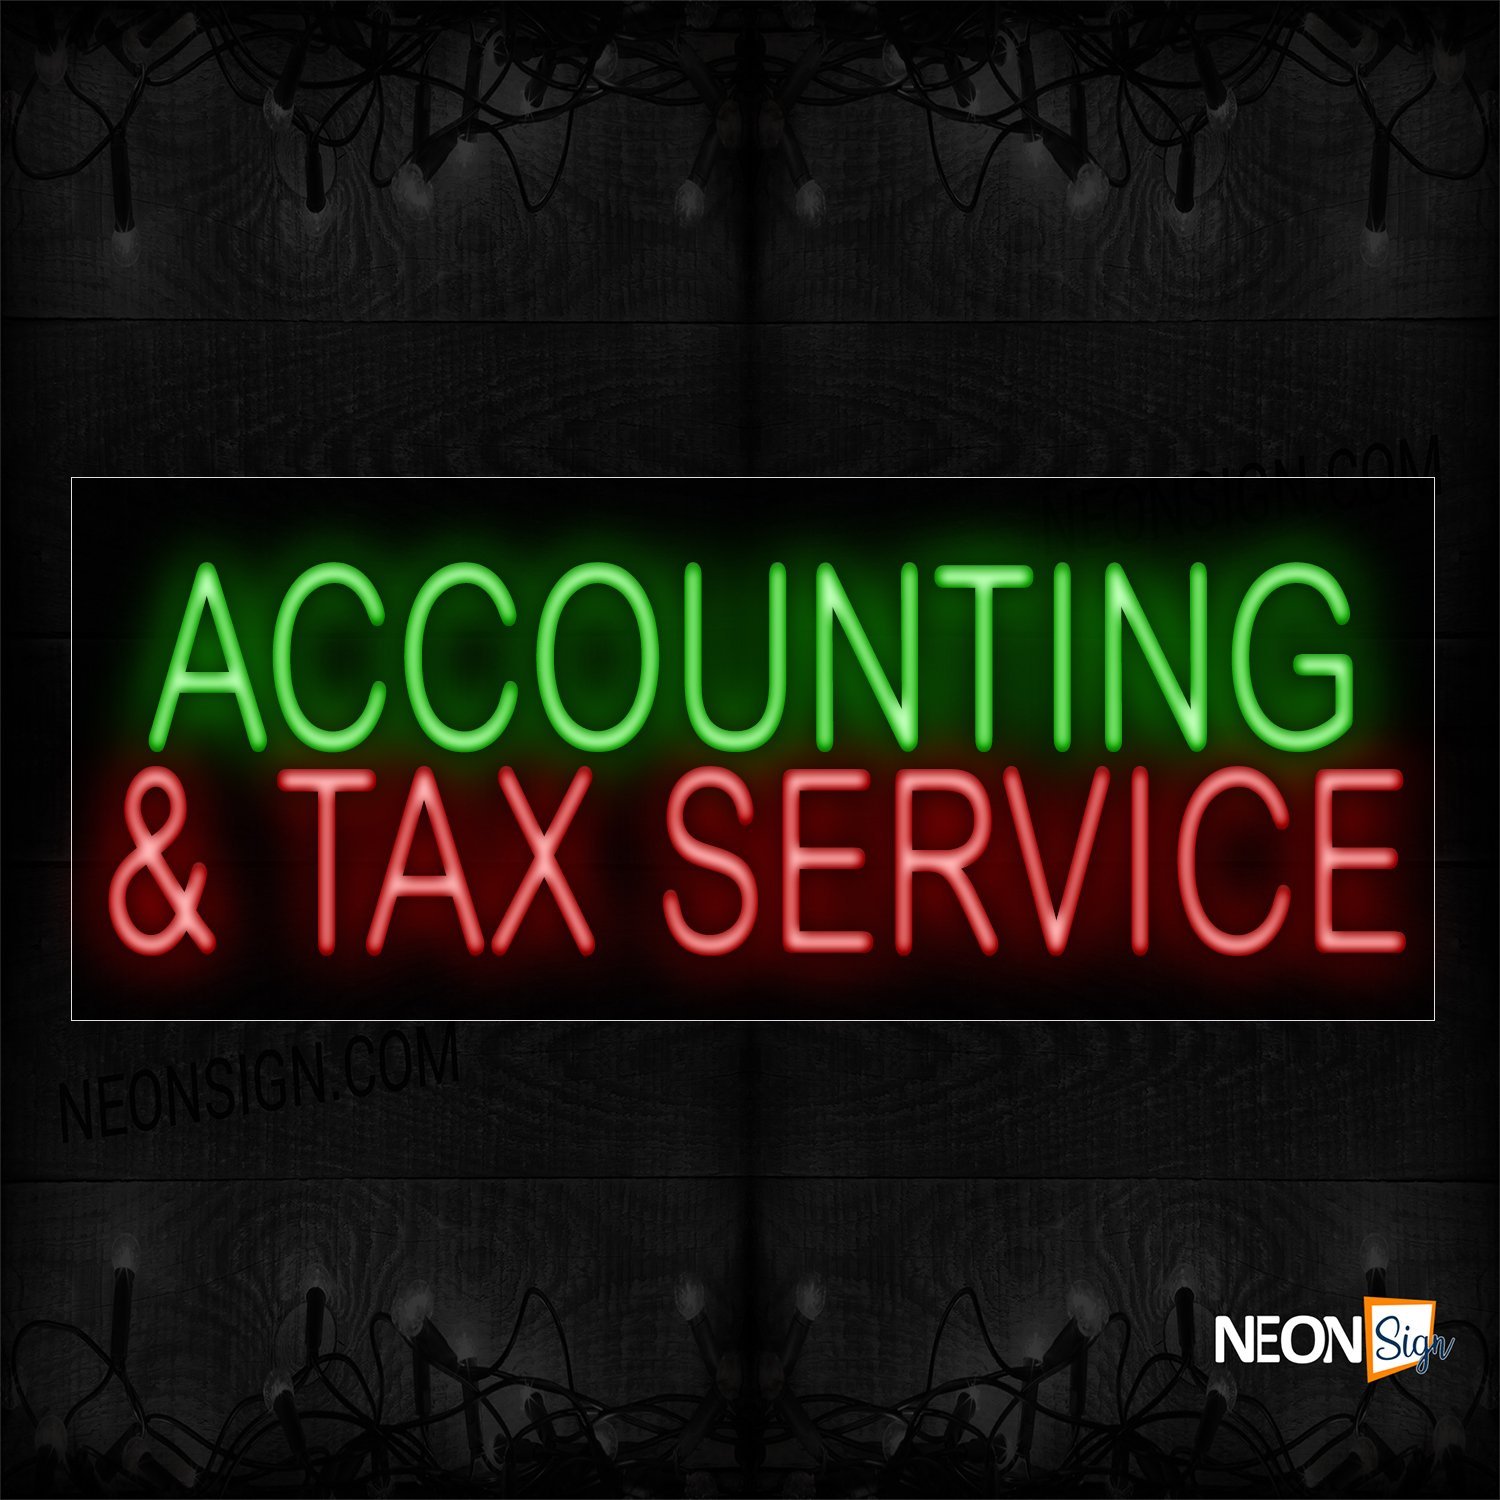 Image of 11346 Accounting & Tax Service Neon Sign_13x32 Black Backing